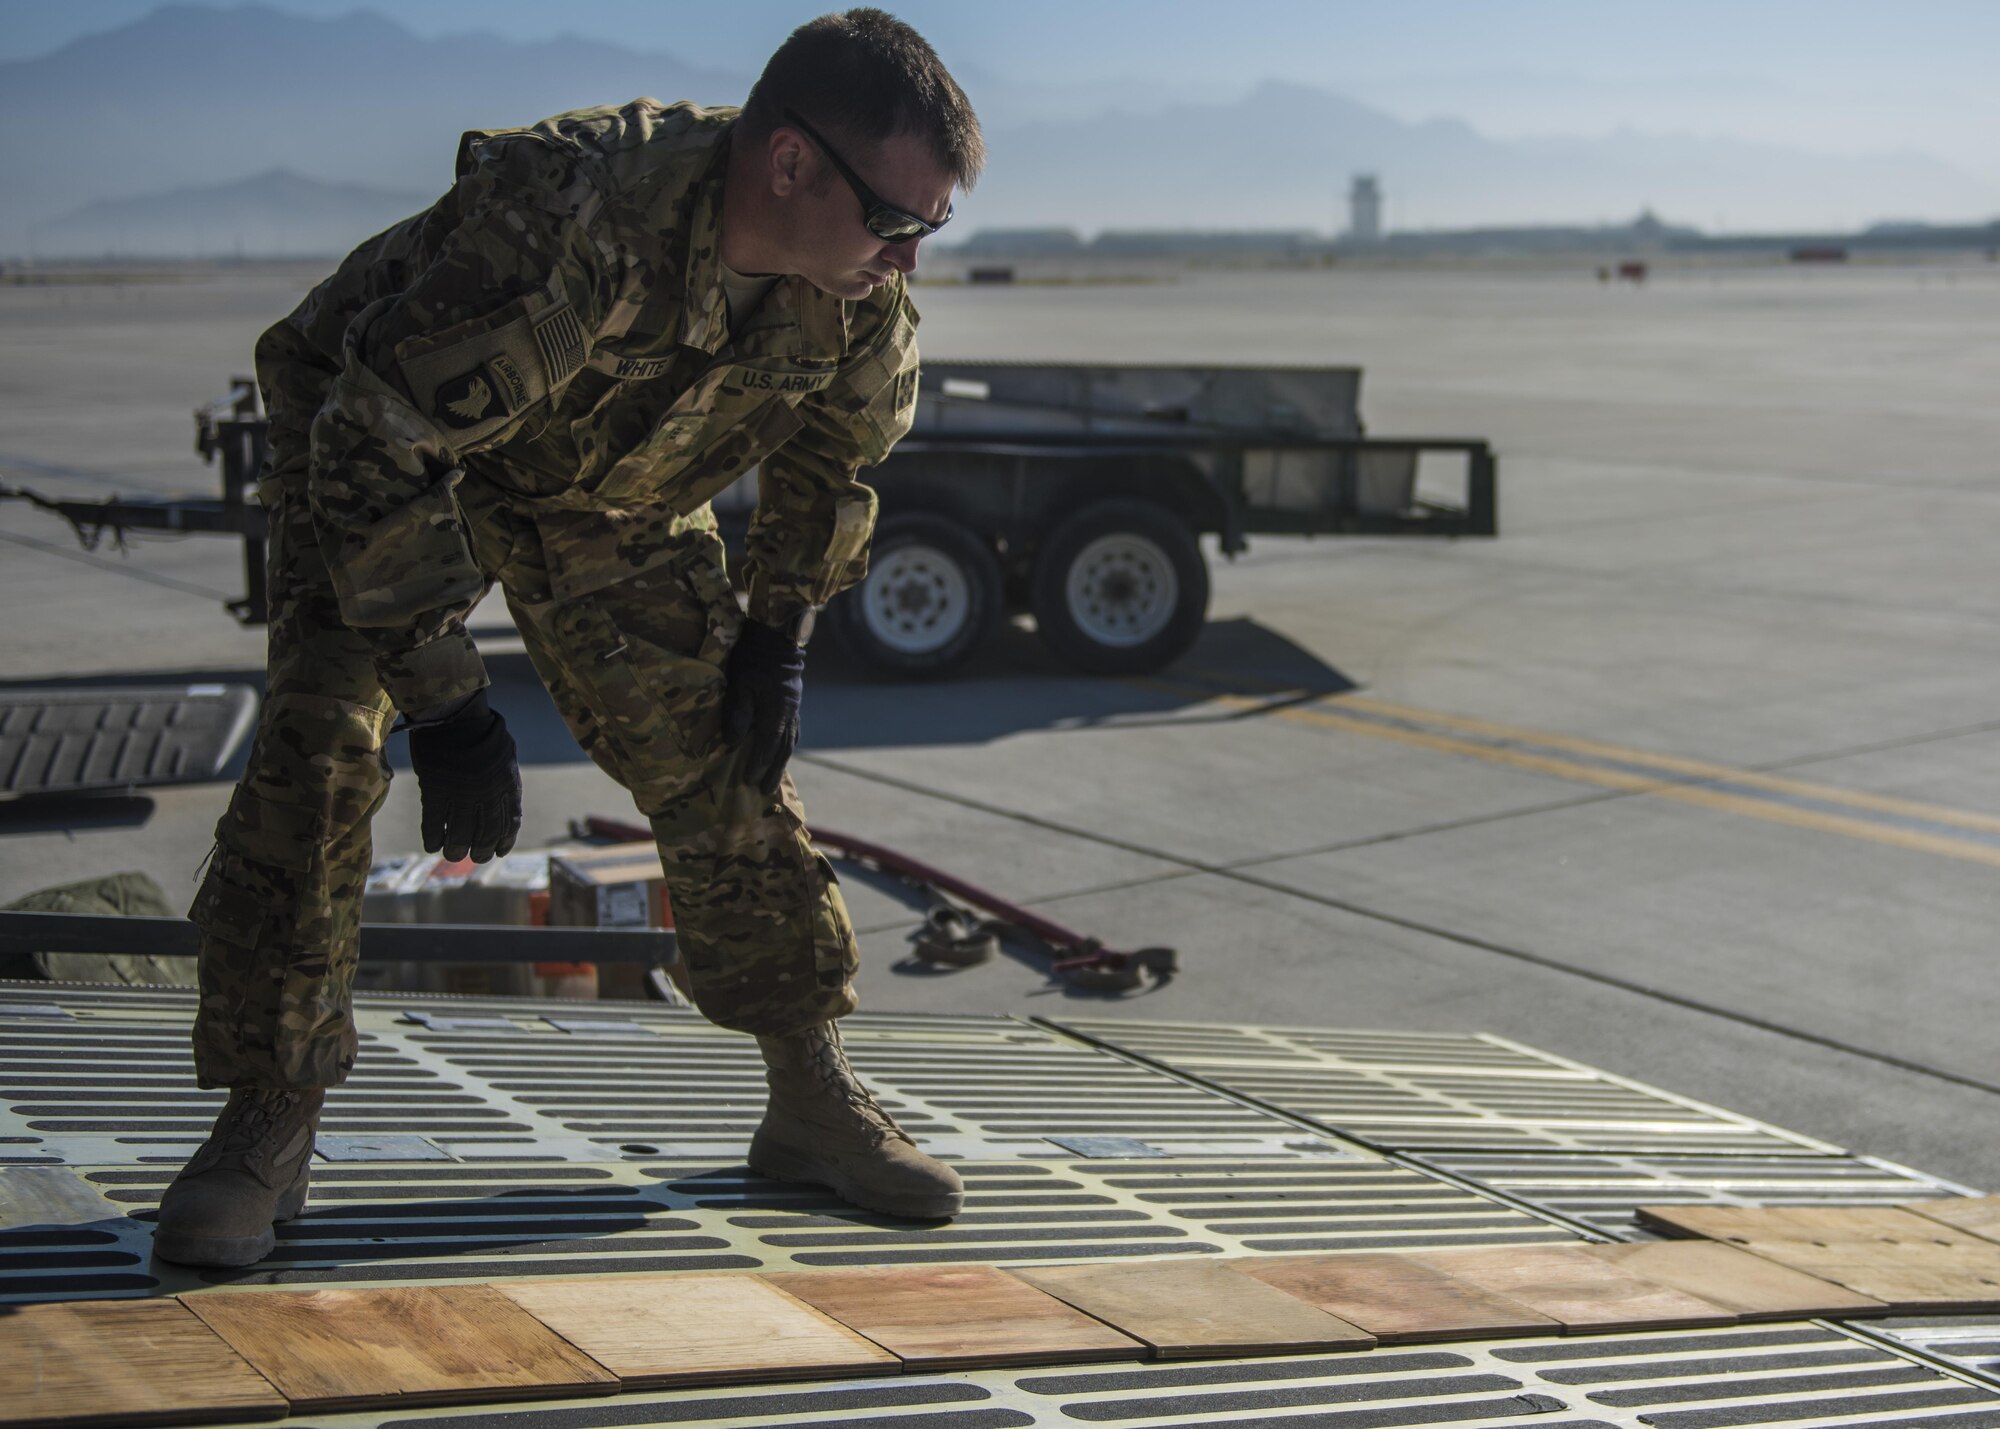 U.S. Army Chief Warrant Officer 3 Daniel White, brigade aviation maintenance officer, aligns wood pieces on a C-5 Galaxy, Bagram Airfield, Afghanistan, Sept. 8, 2016. The wood pieces were used to build a ramp to help load a Sikorsky UH-60 Blackhawk for transport. The Air Force C-5 Galaxy is a military transport aircraft and can handle a payload of up to 5 helicopters. (U.S. Air Force photo by Senior Airman Justyn M. Freeman)